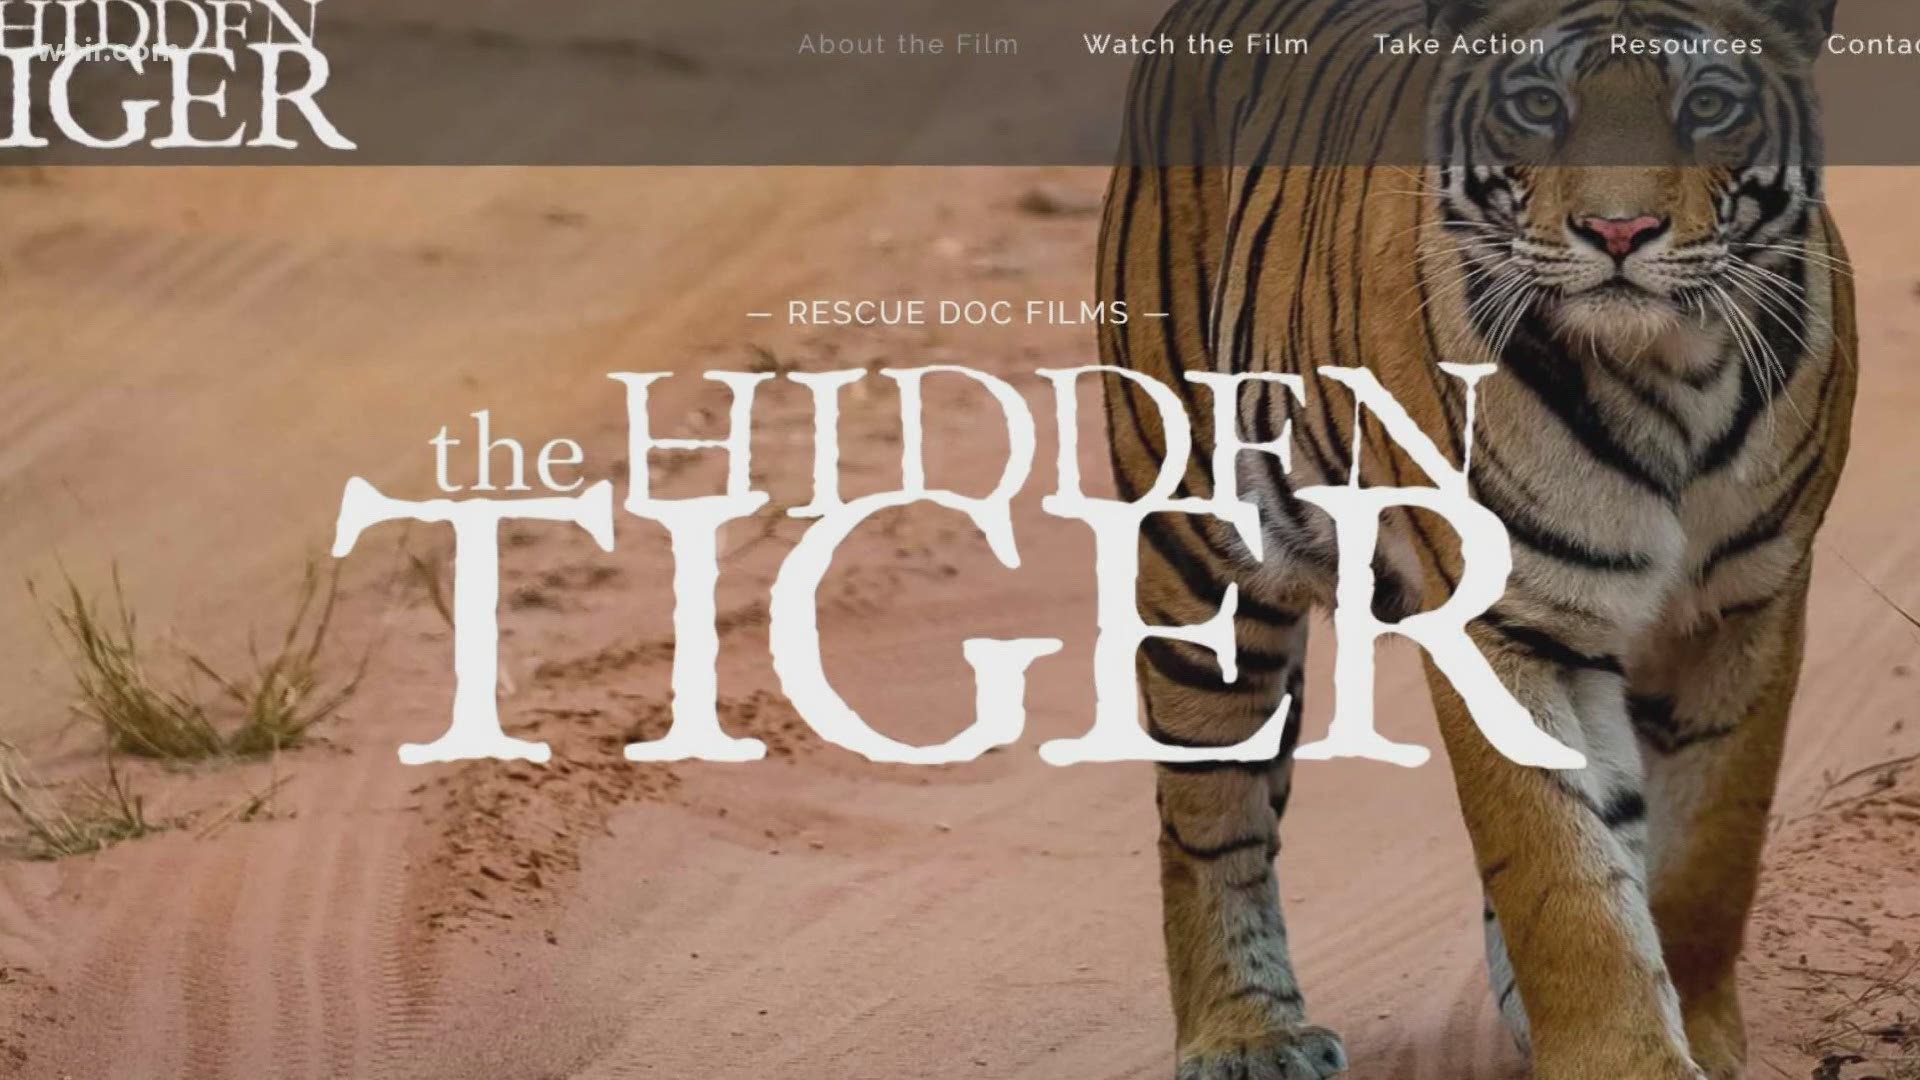 What does Knoxville and Tiger King's Carole Baskin have in common? A new documentary focusing on saving big cats.